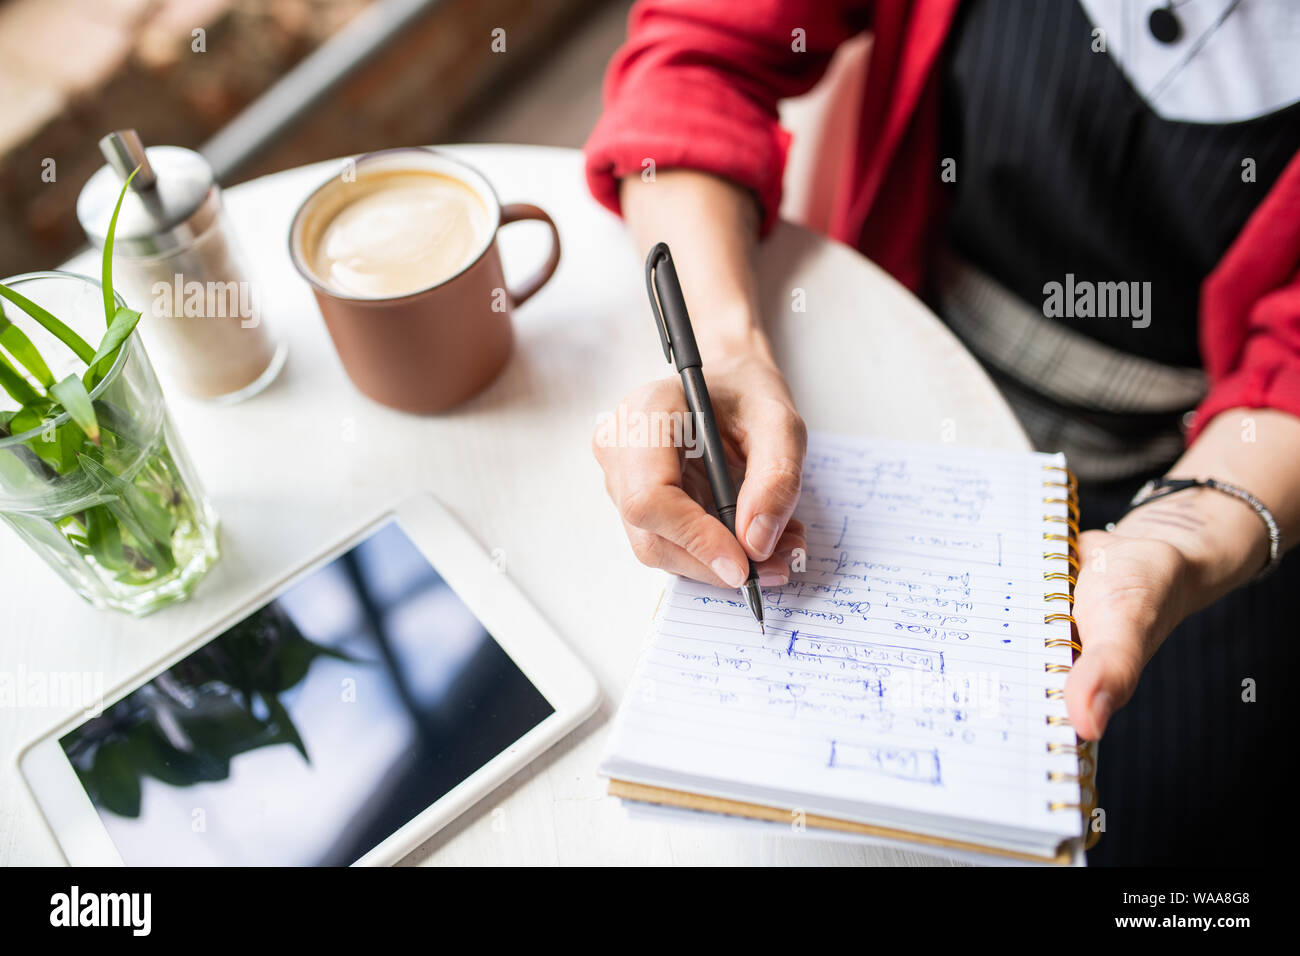 Young woman writing down working notes in notebook while sitting by table Stock Photo